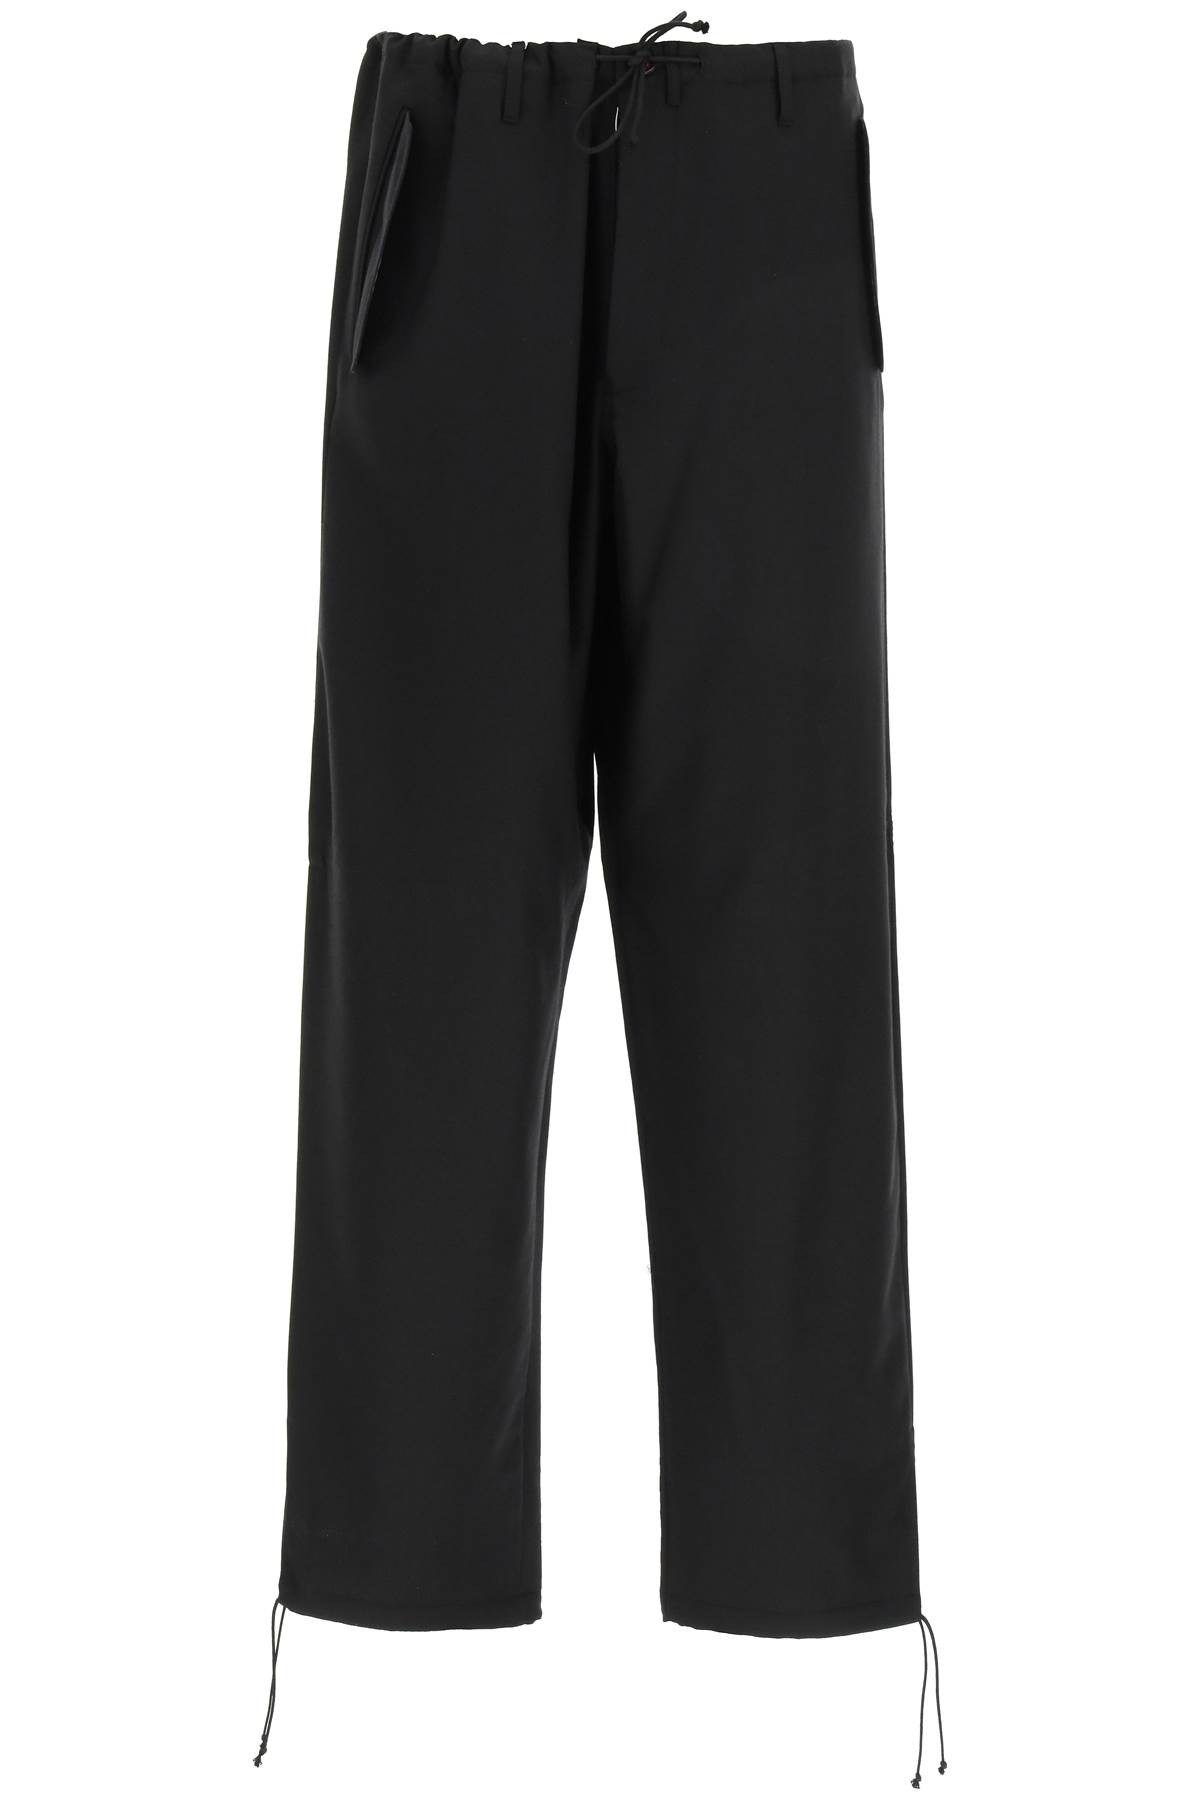 Maison Margiela Wool Blend Trousers With Drawstring